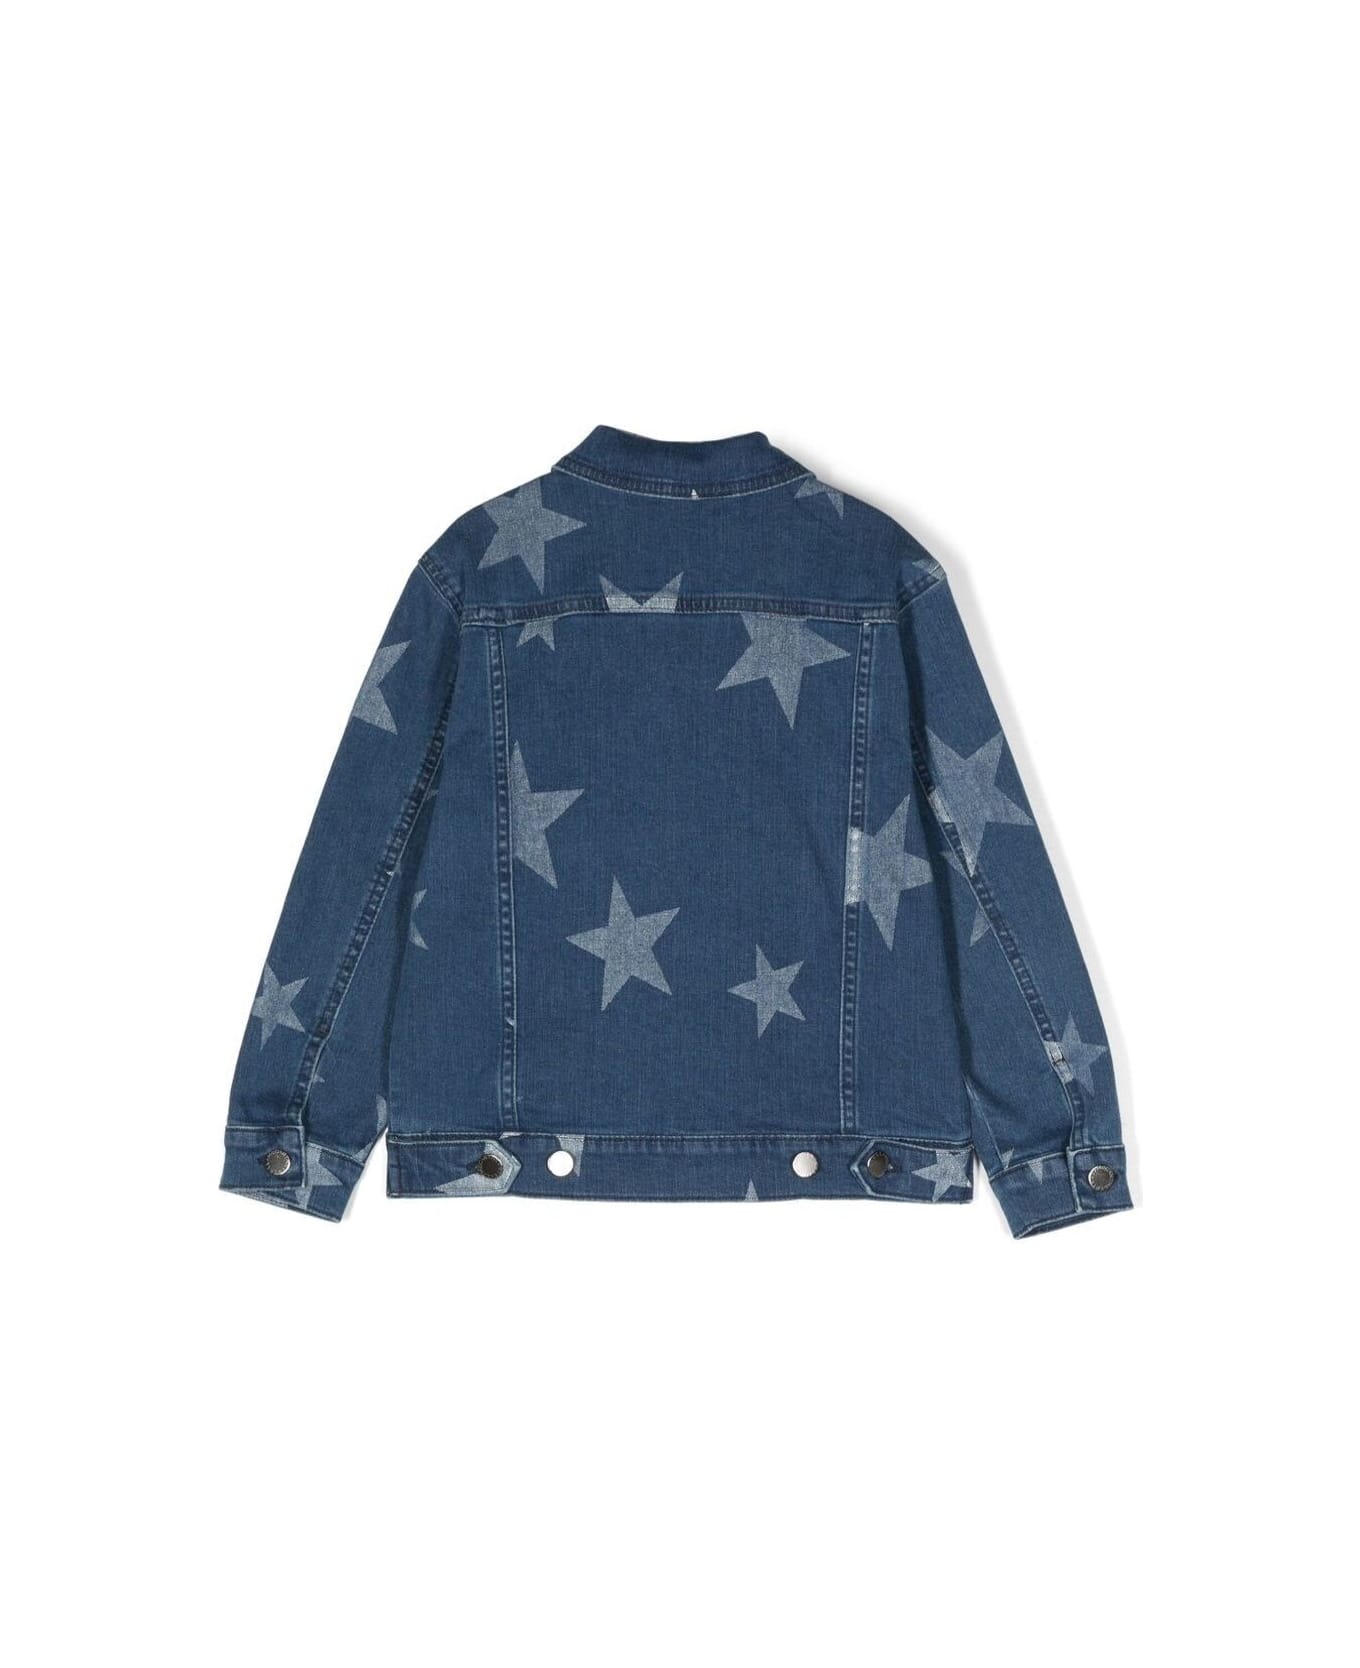 Stella McCartney Kids Jeans Jacket With Star Print In Stretch Cotton Girl - Blue